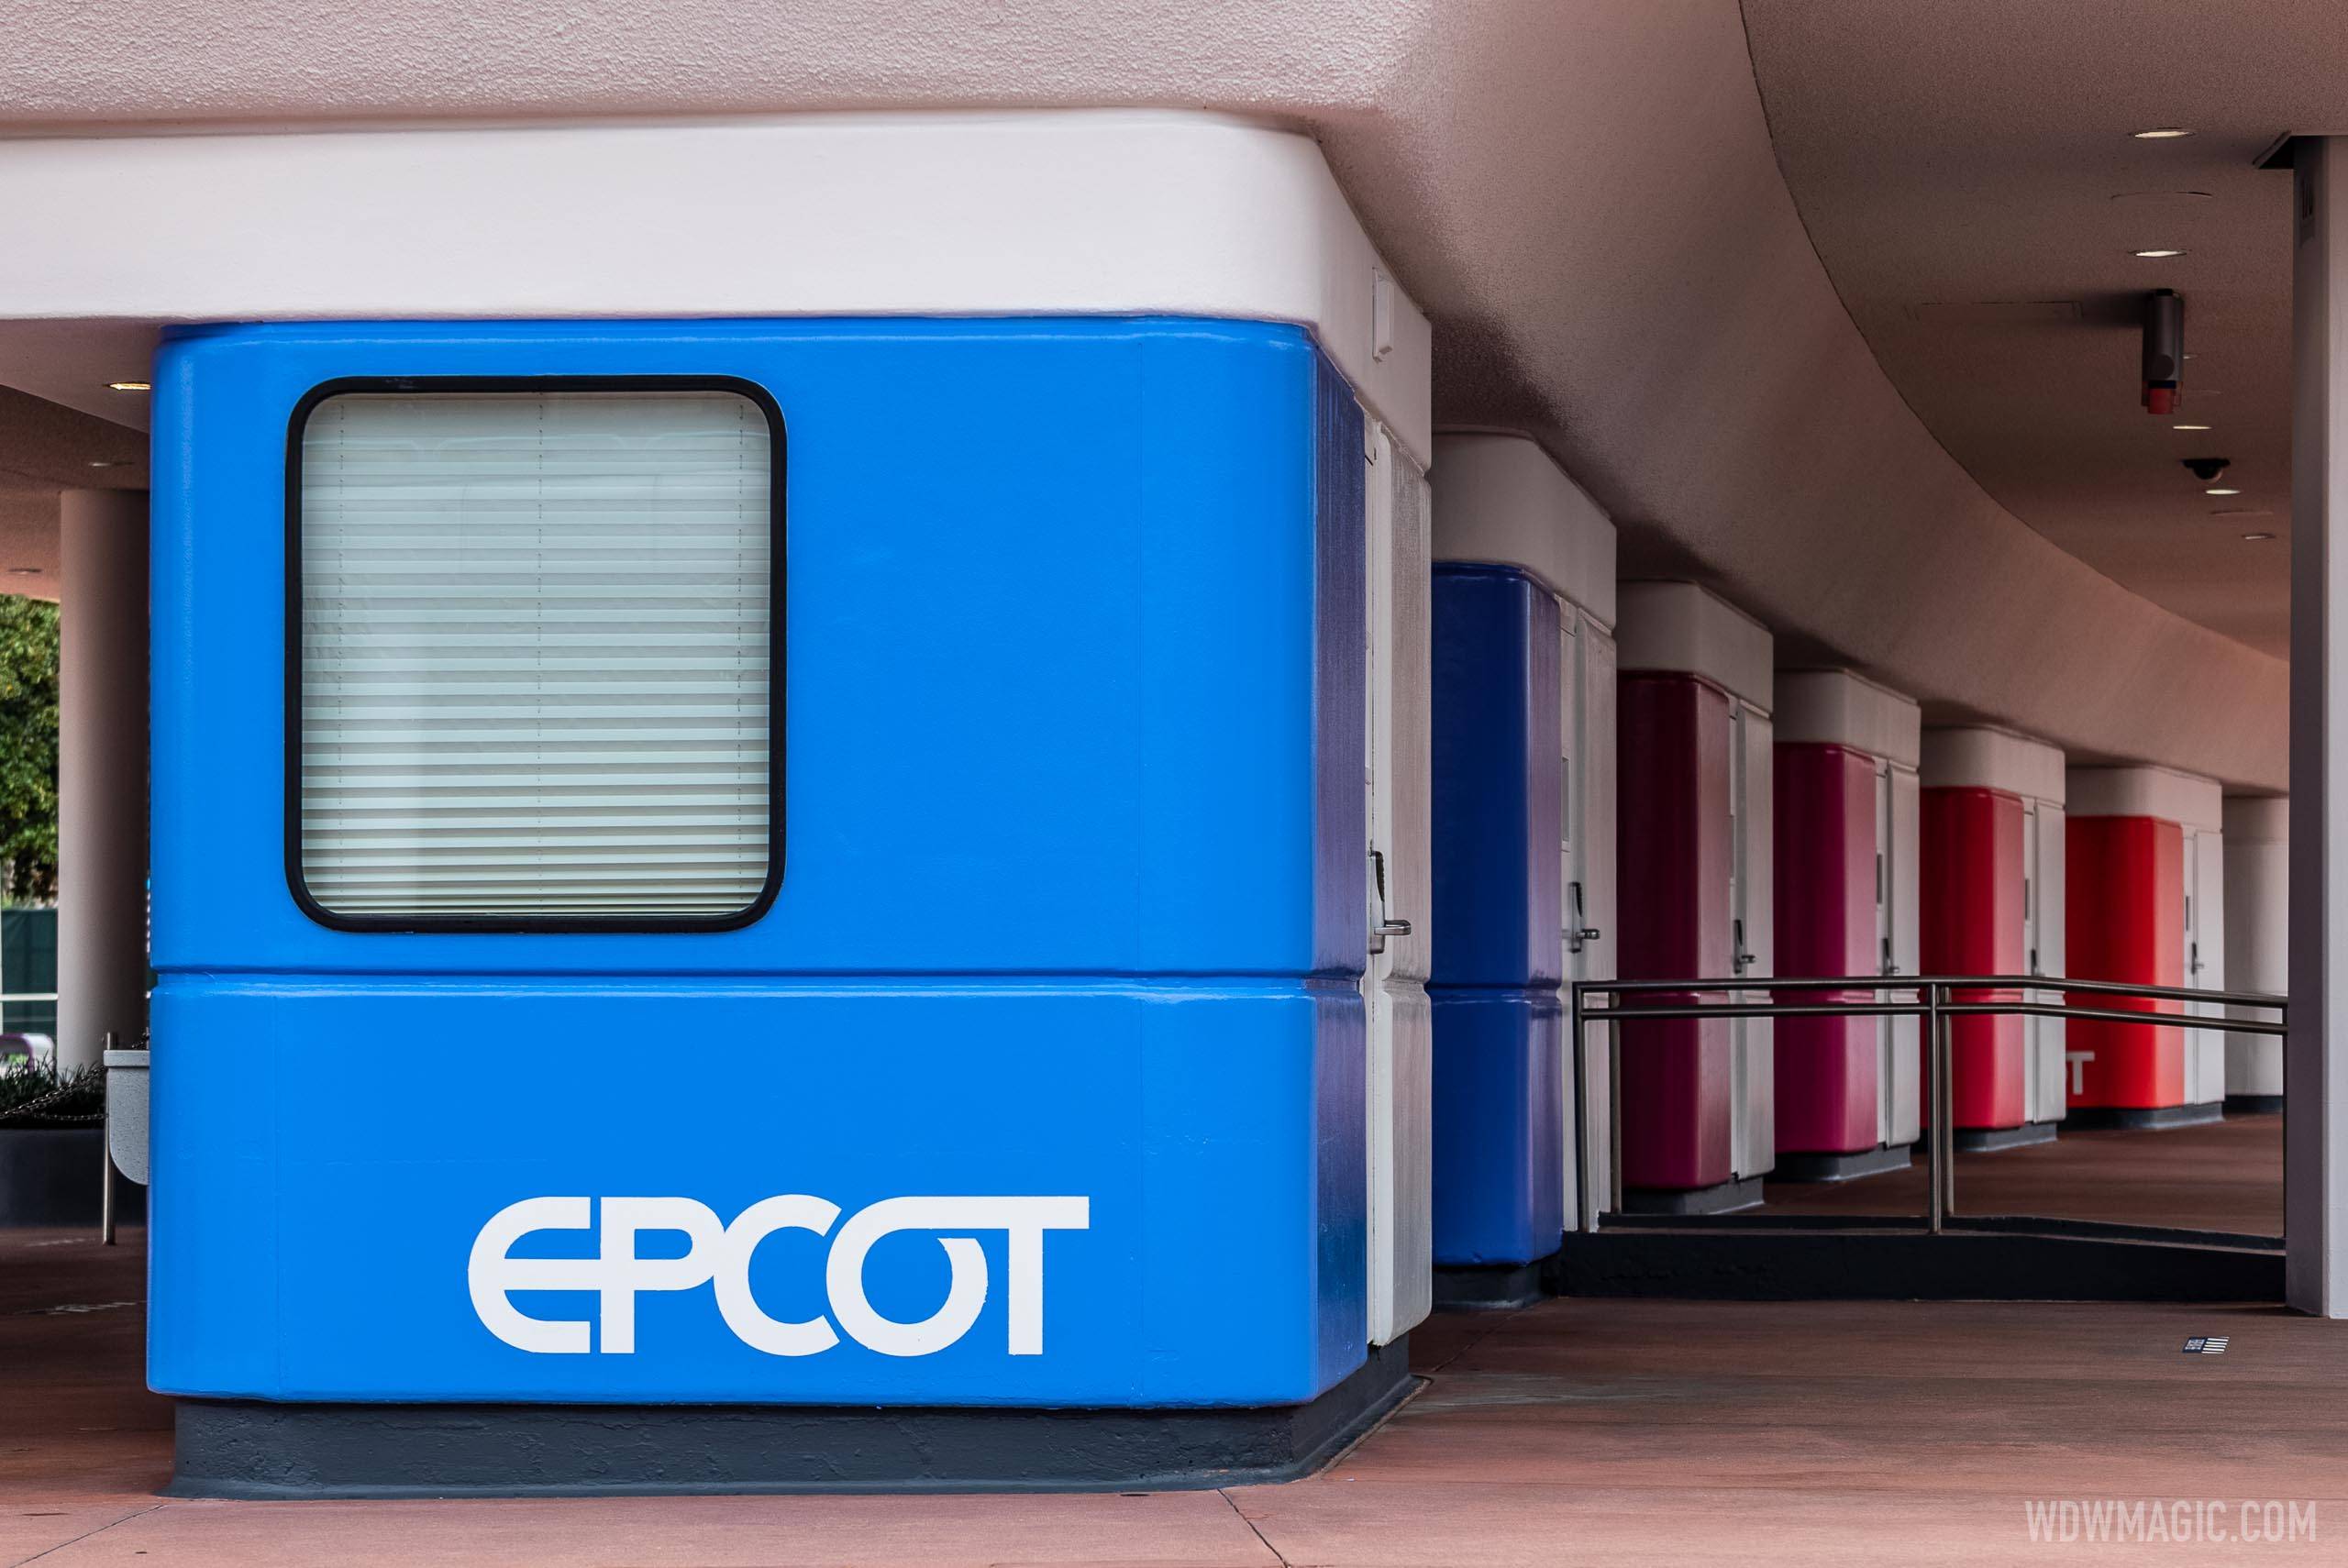 EPCOT logo added to ticket booths